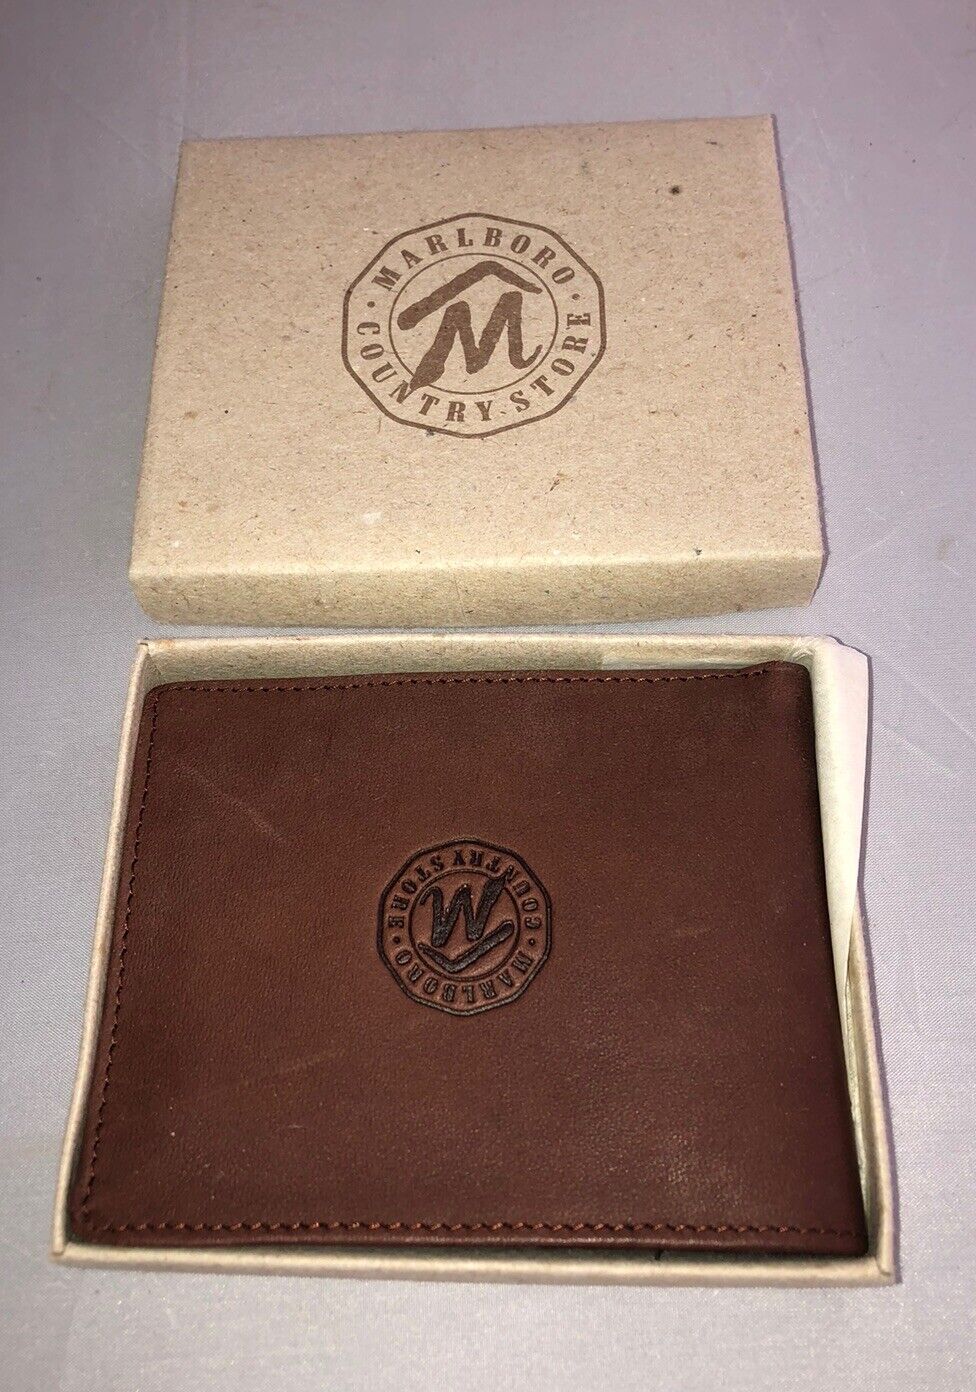 VINTAGE MARLBORO COUNTRY STORE BROWN LEATHER MENS BiFold WALLET In Original Box